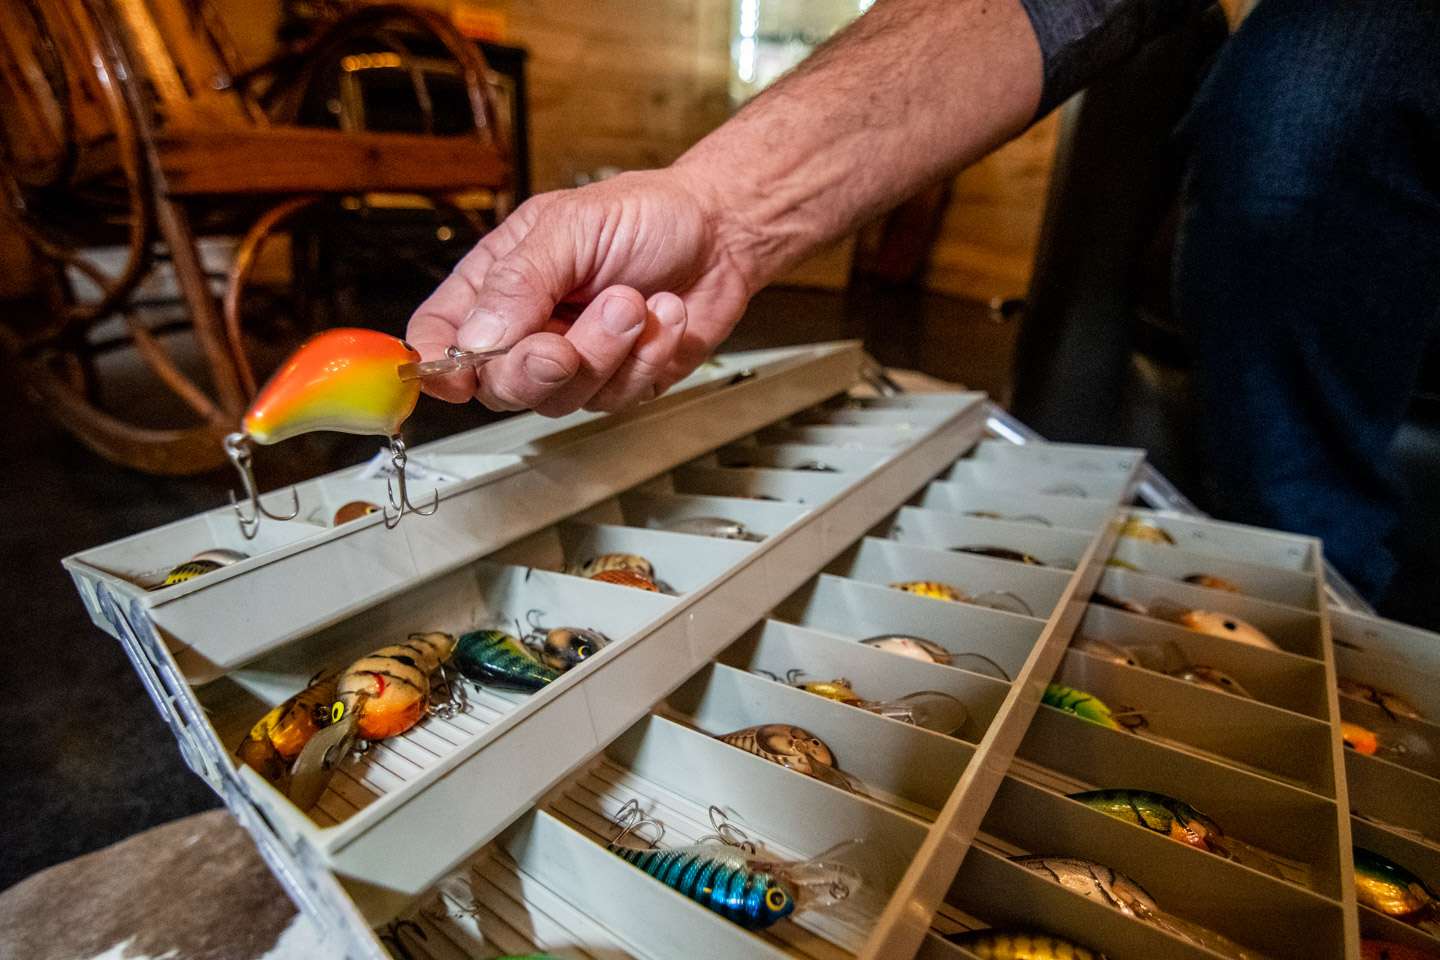 This old tacklebox is filled with a variety of Bagley crankbaits and other lures.